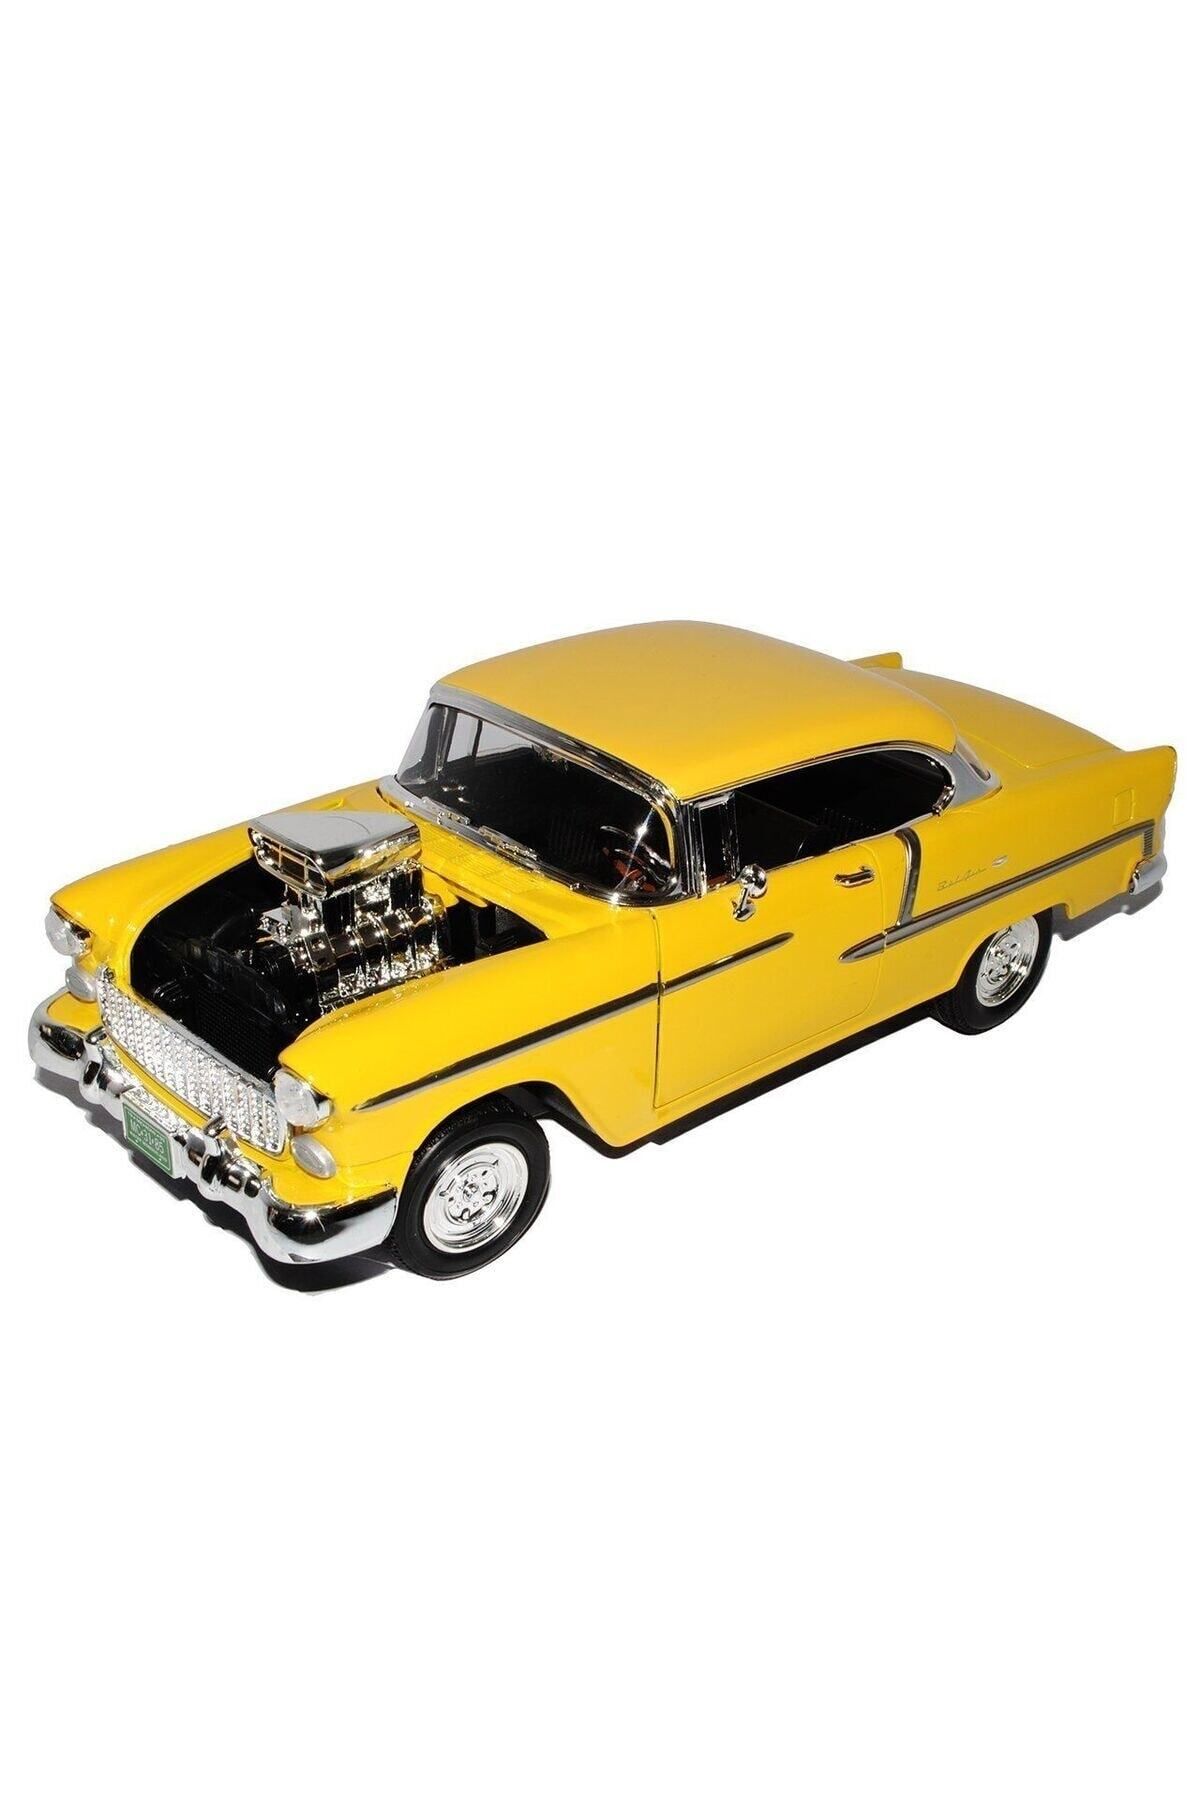 Motor Max 1955 Chevy Bel Air Premium Gold Collecton 1:18 Limited Edition